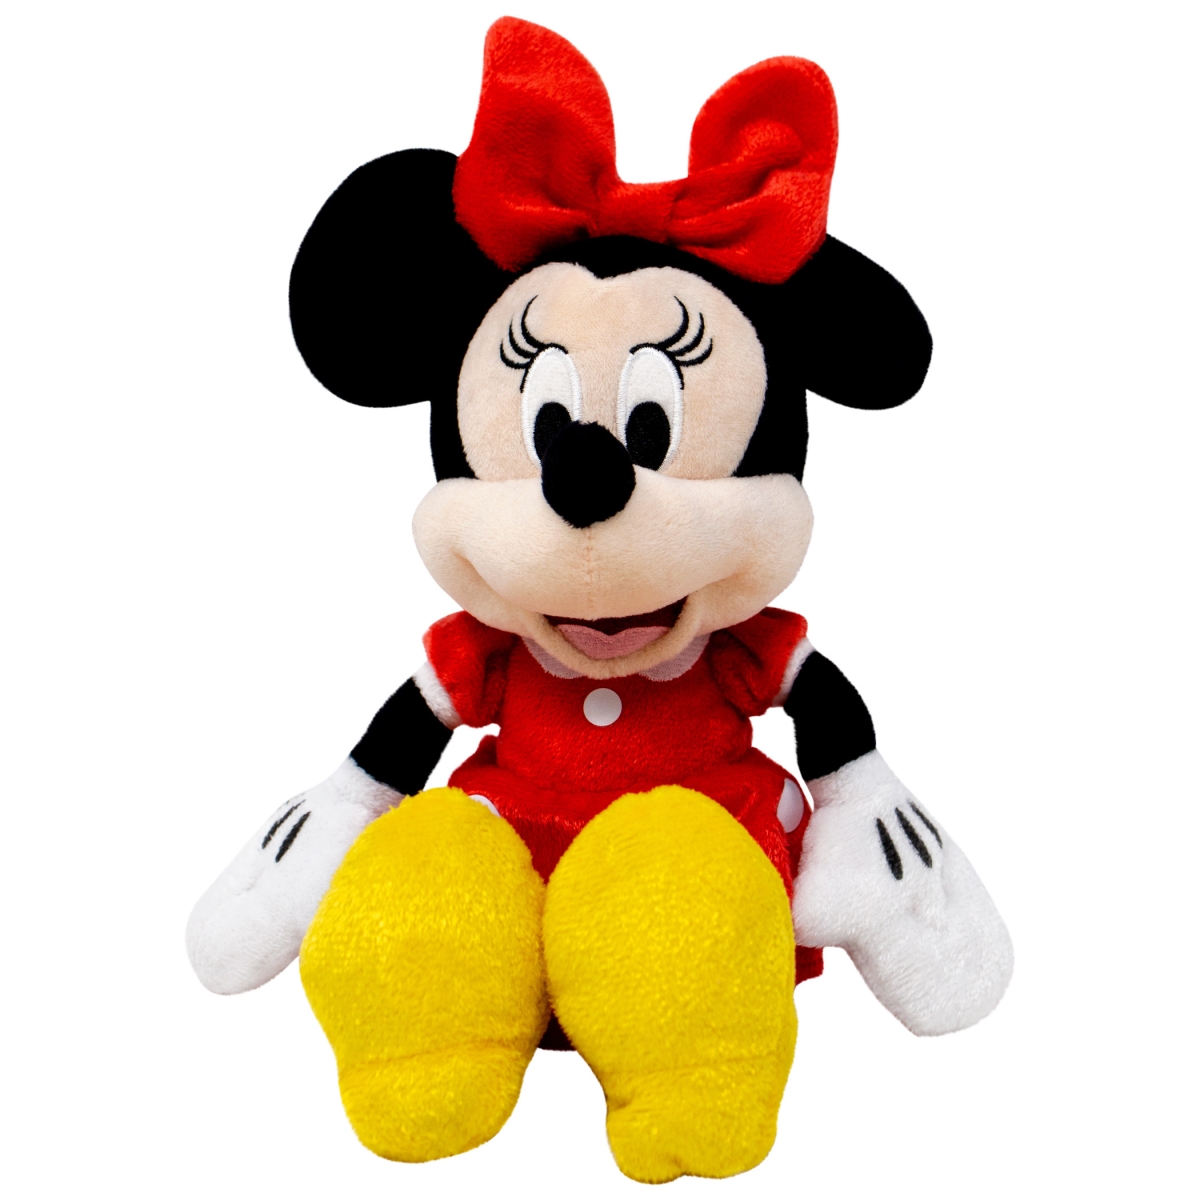 Picture of Mickey Mouse 804555 Disney Minnie Mouse Red Dress Plush Doll - 11 in.